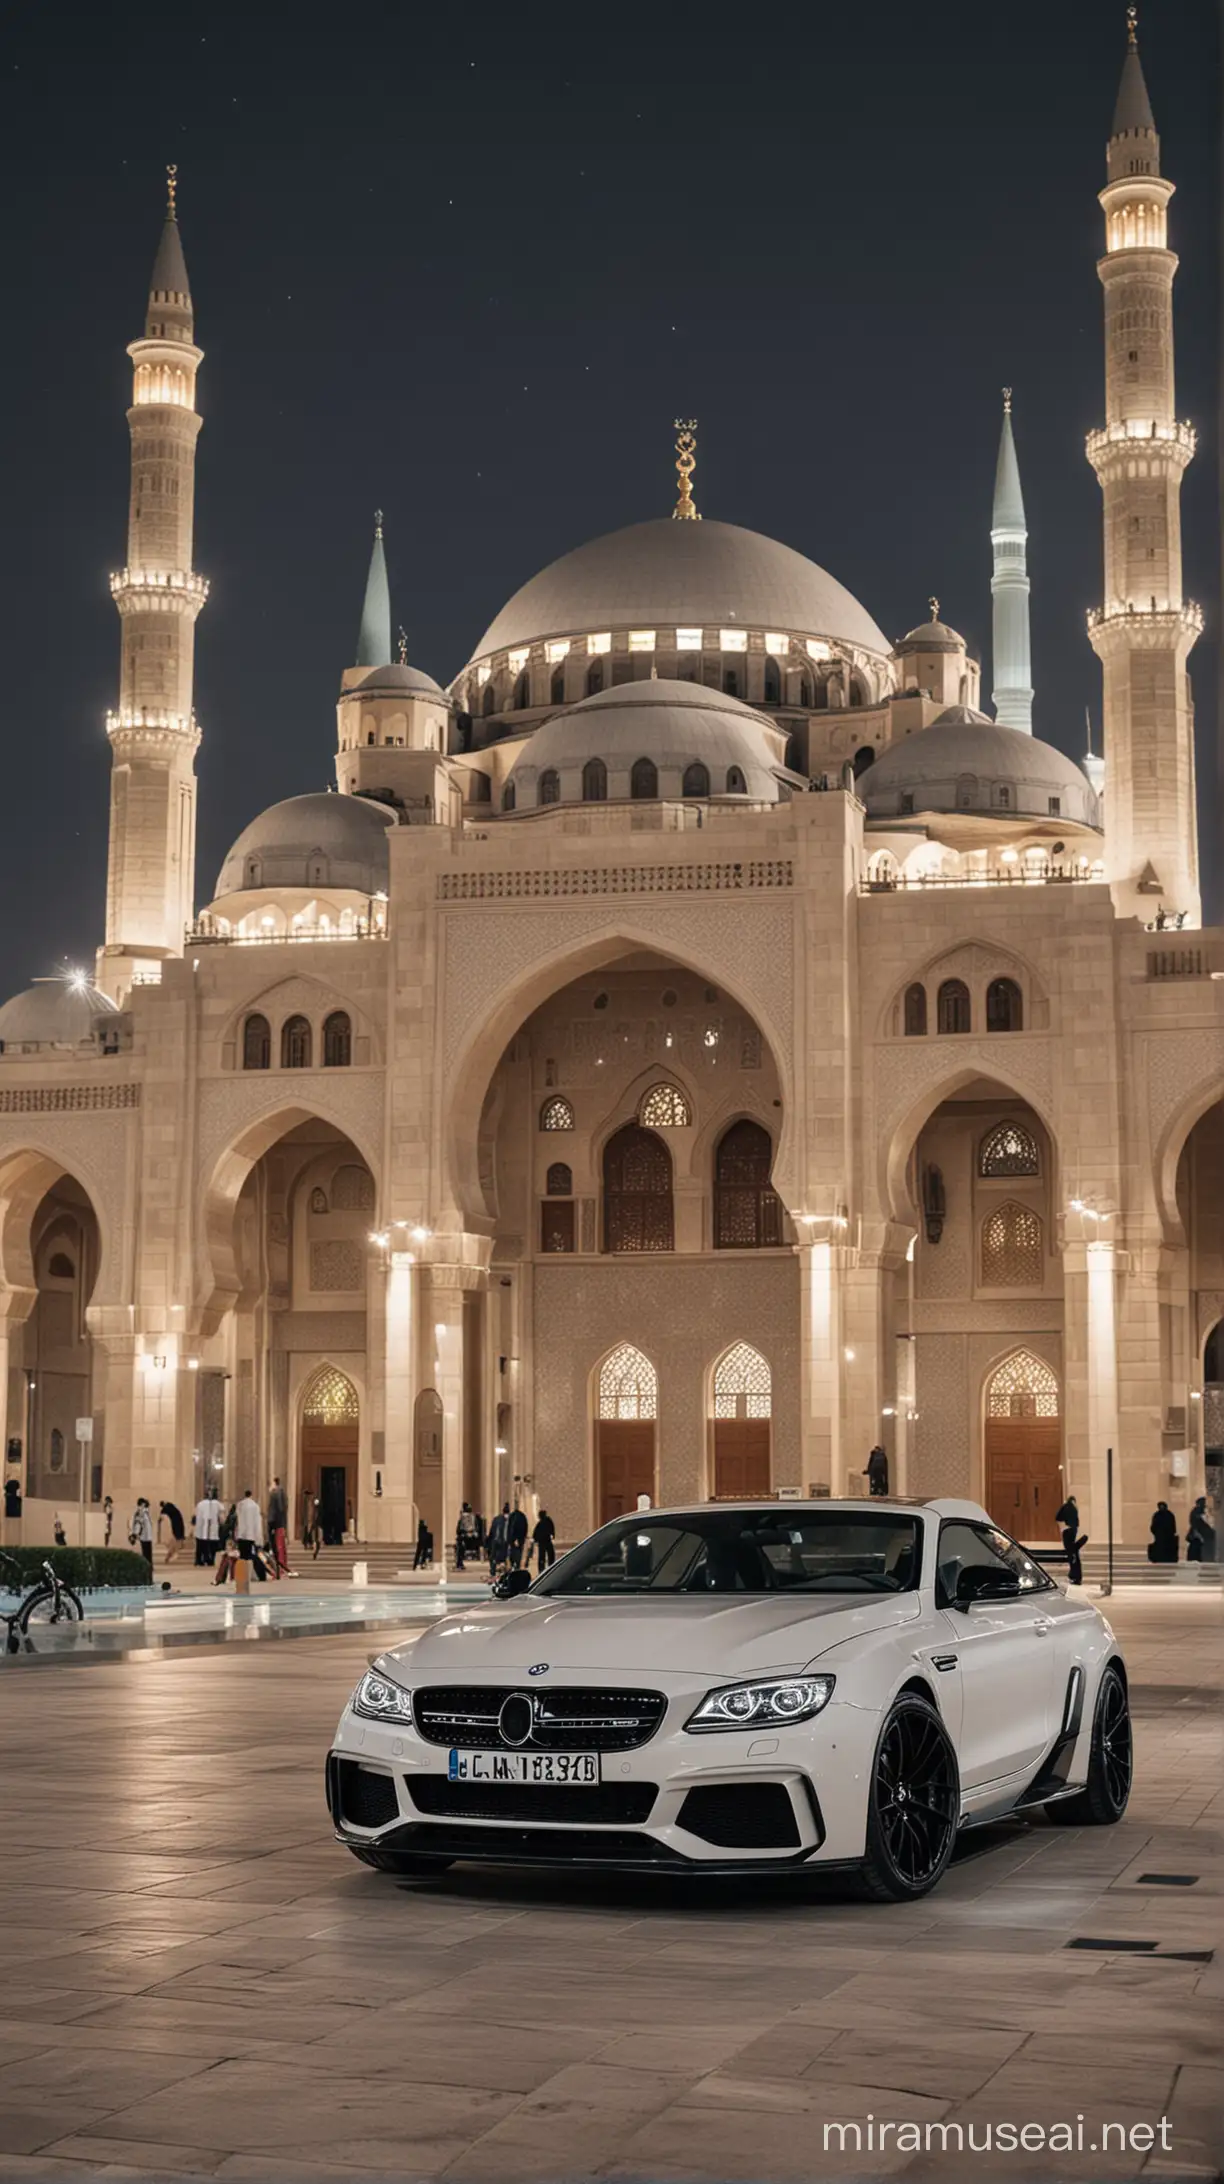 Give me a picture of BMW, Mercedes, Volkswagen, and Audi in front of a Mosque for ramadhan